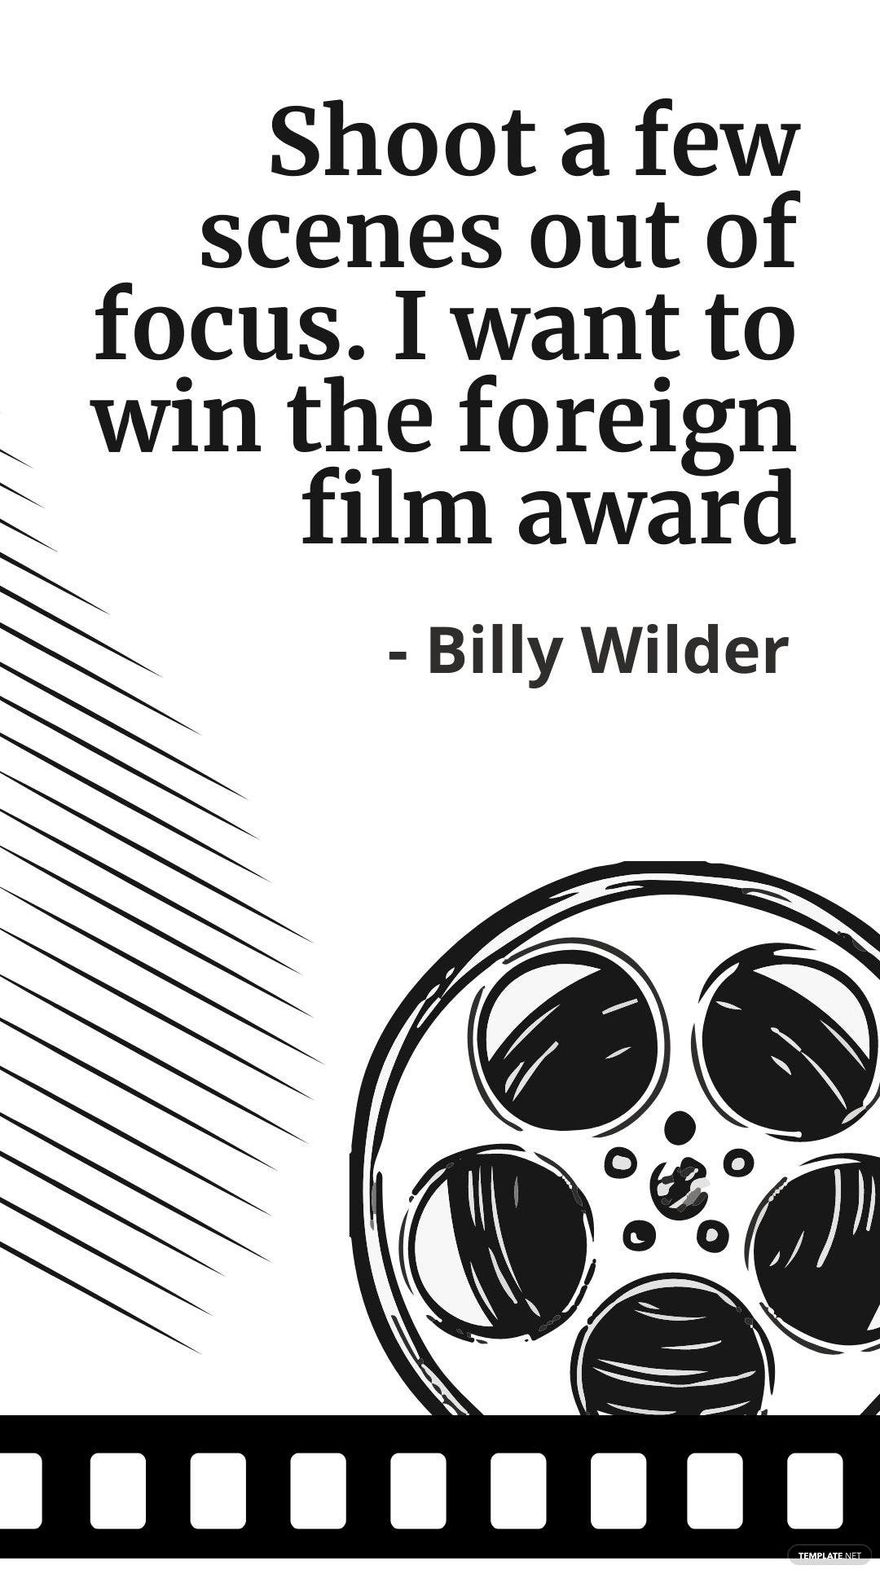 Billy Wilder - Shoot a few scenes out of focus. I want to win the foreign film award in JPG